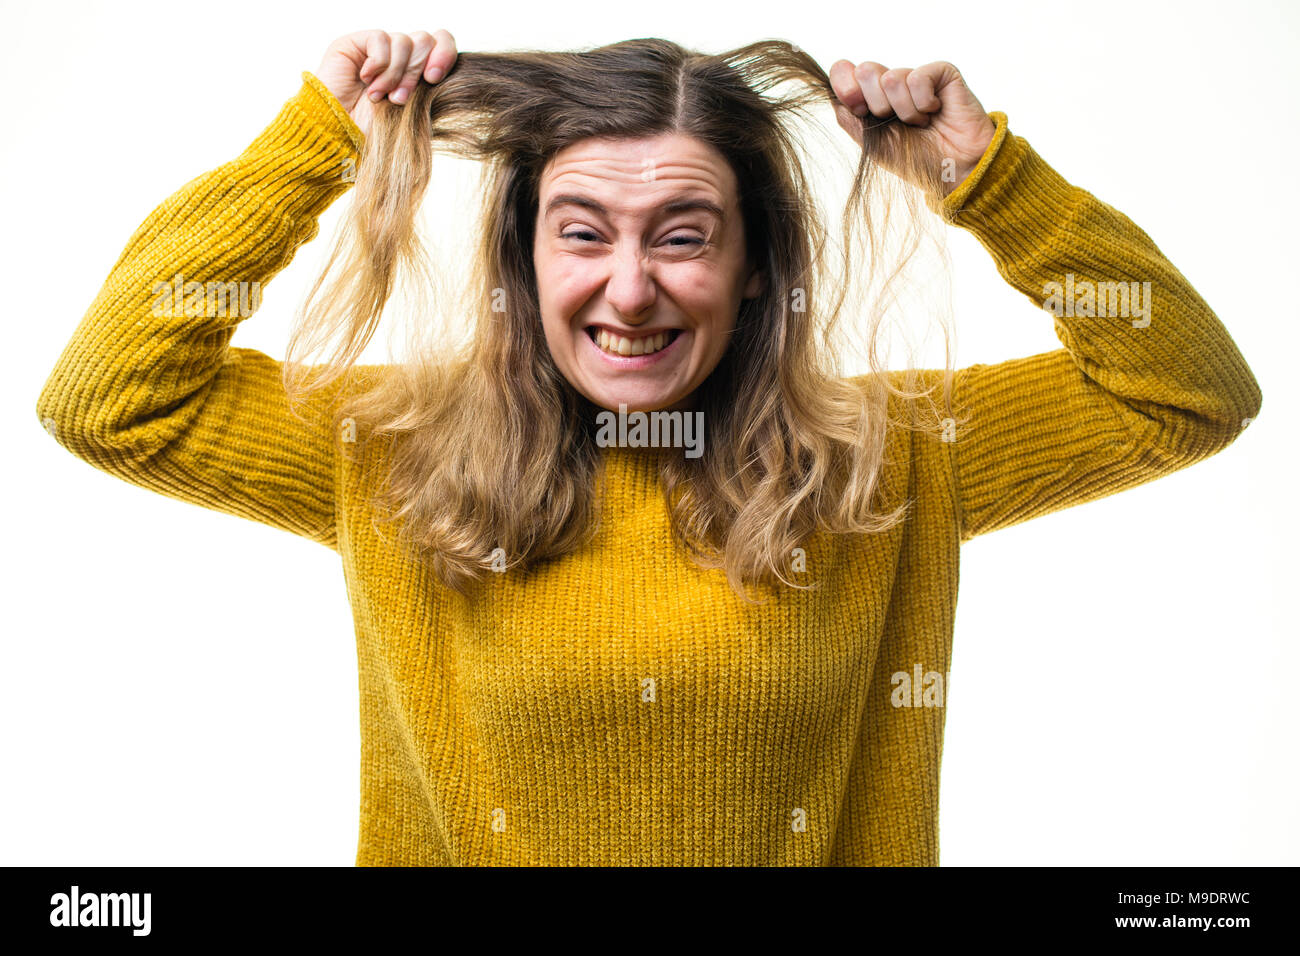 A young Caucasian woman girl wearing a yellow jumper sweater, looking frustrated and angry,  pulling her hair against a white background, UK Stock Photo